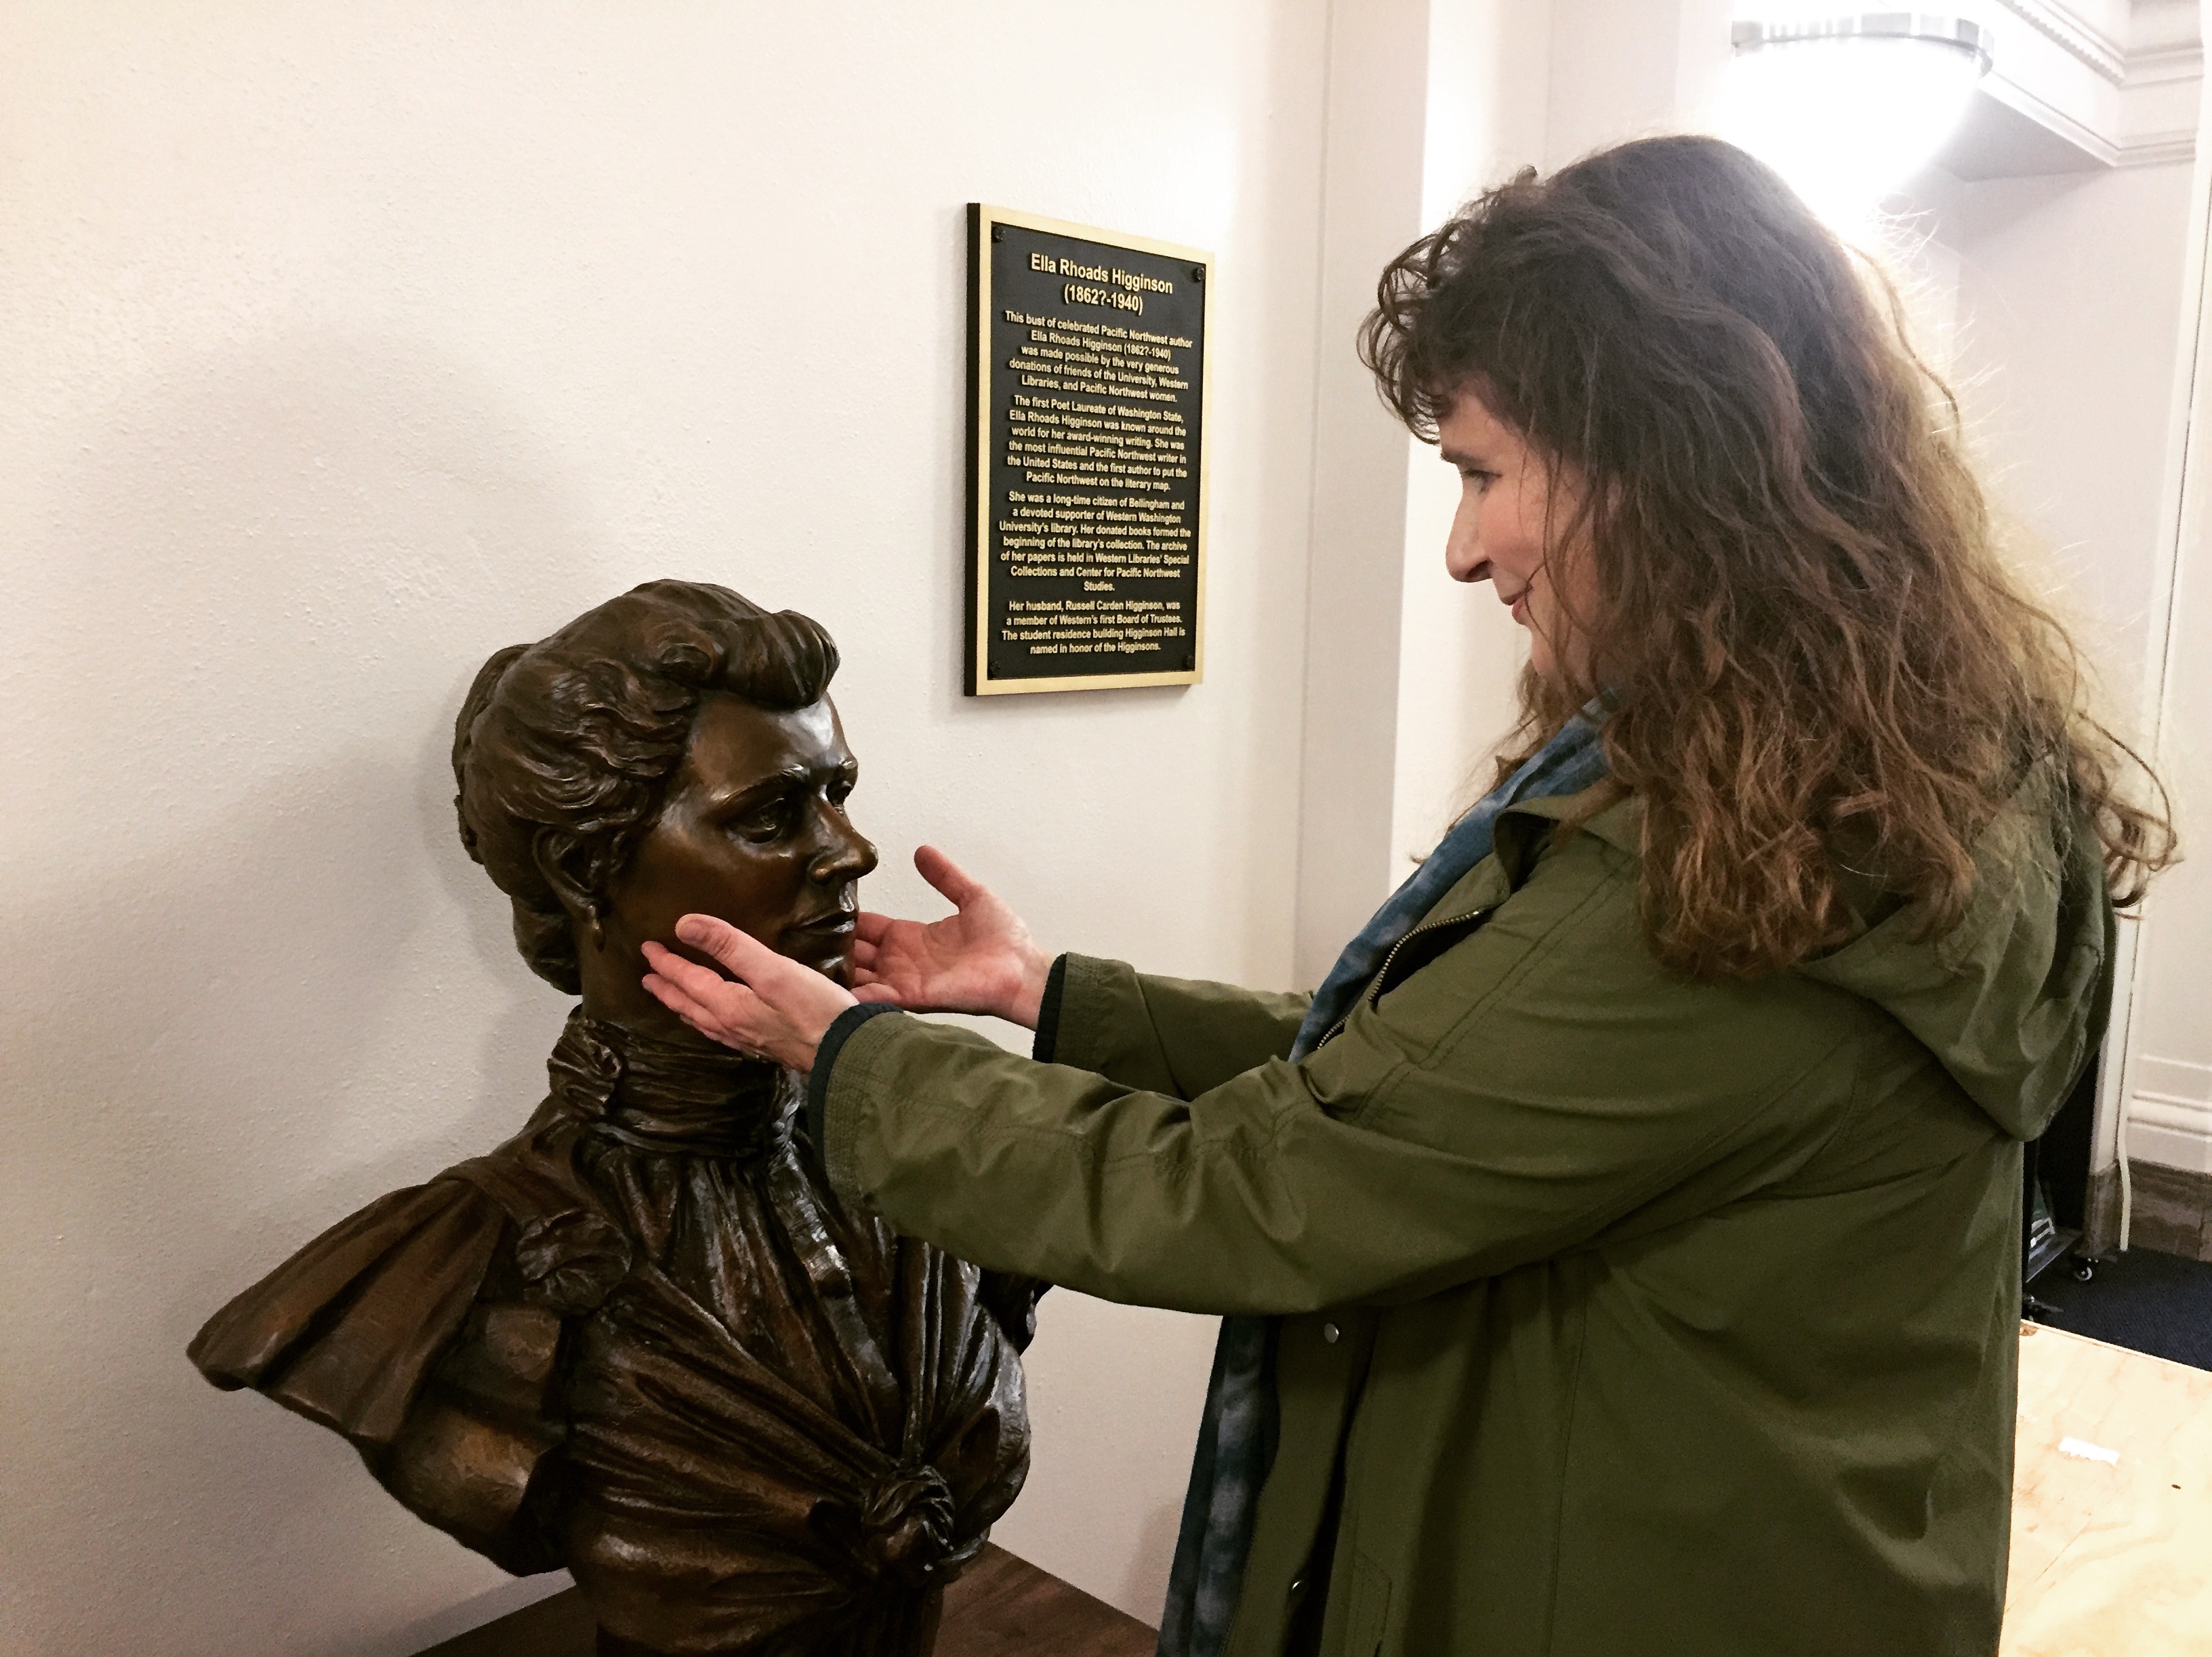 A woman touches the face of a bronze bust